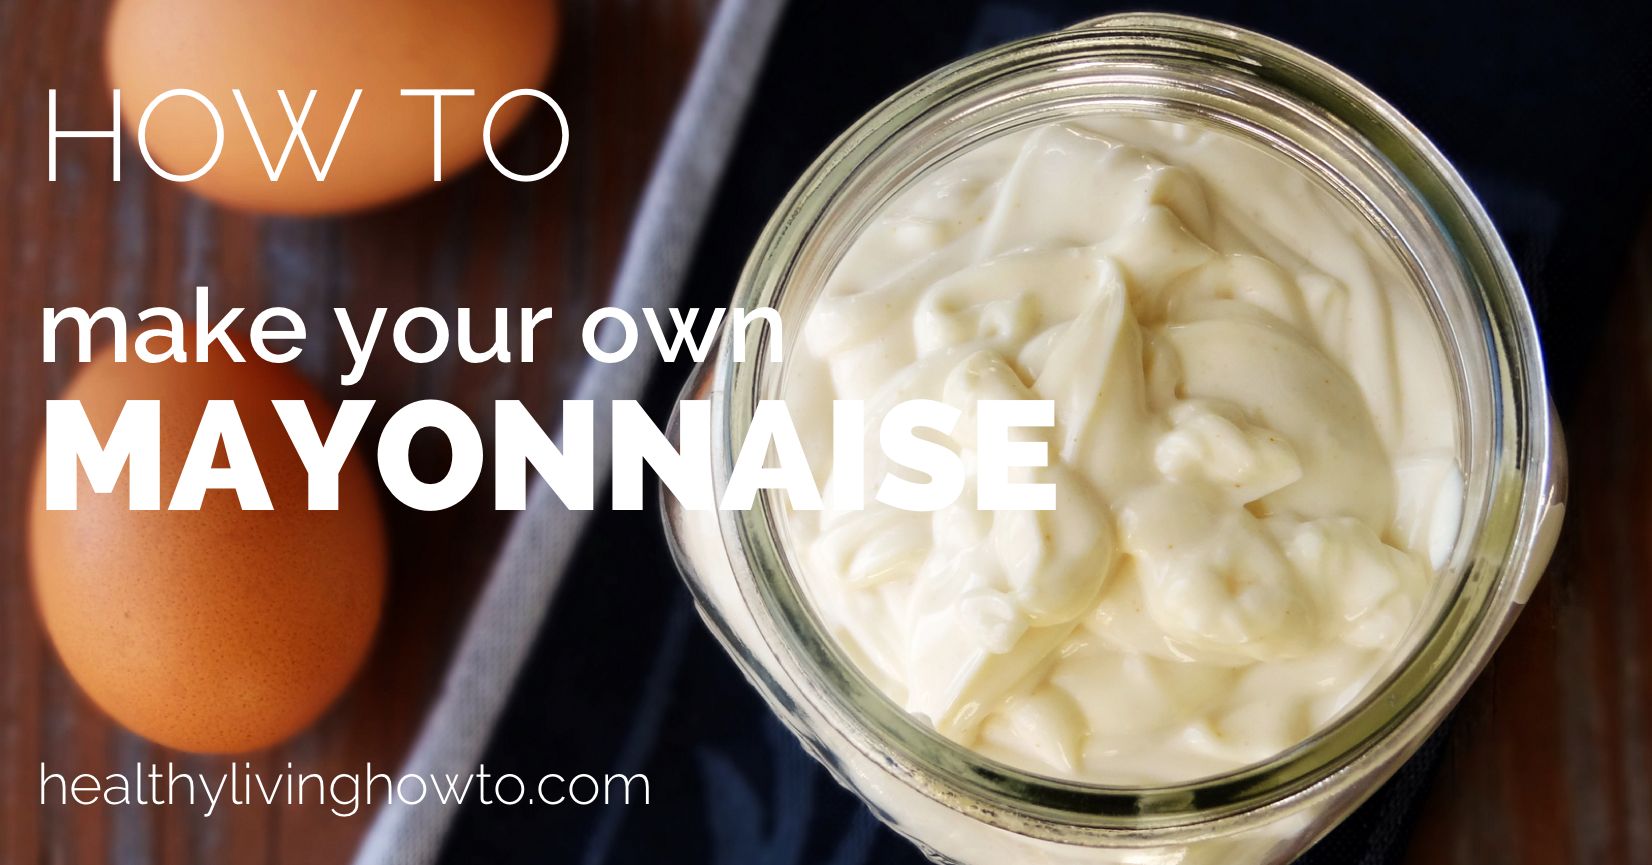 How To Make Your Own Mayo | healthylivinghowto.com